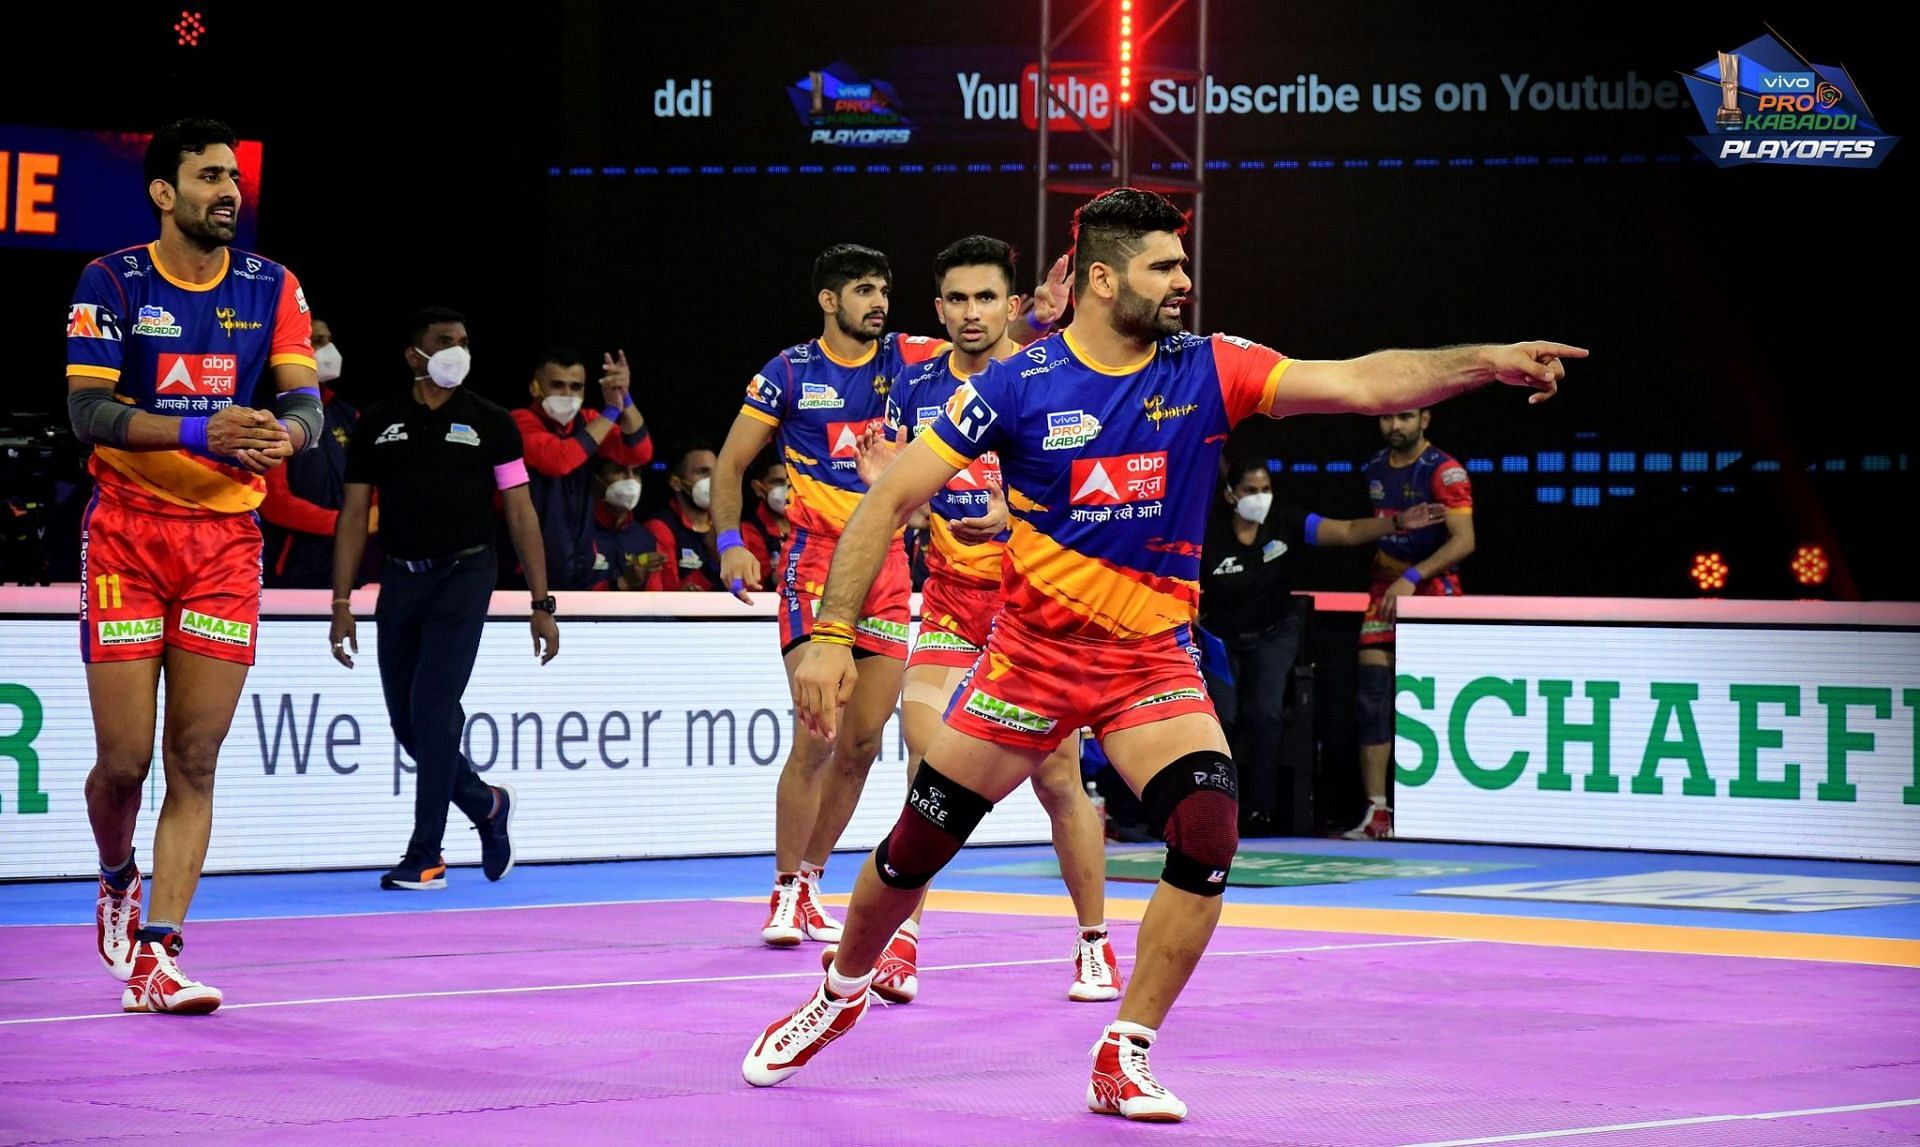 UP Yoddha may retain the duo of Surender Gill and Pardeep Narwal for the next season (Image Courtesy: PKL/Facebook)